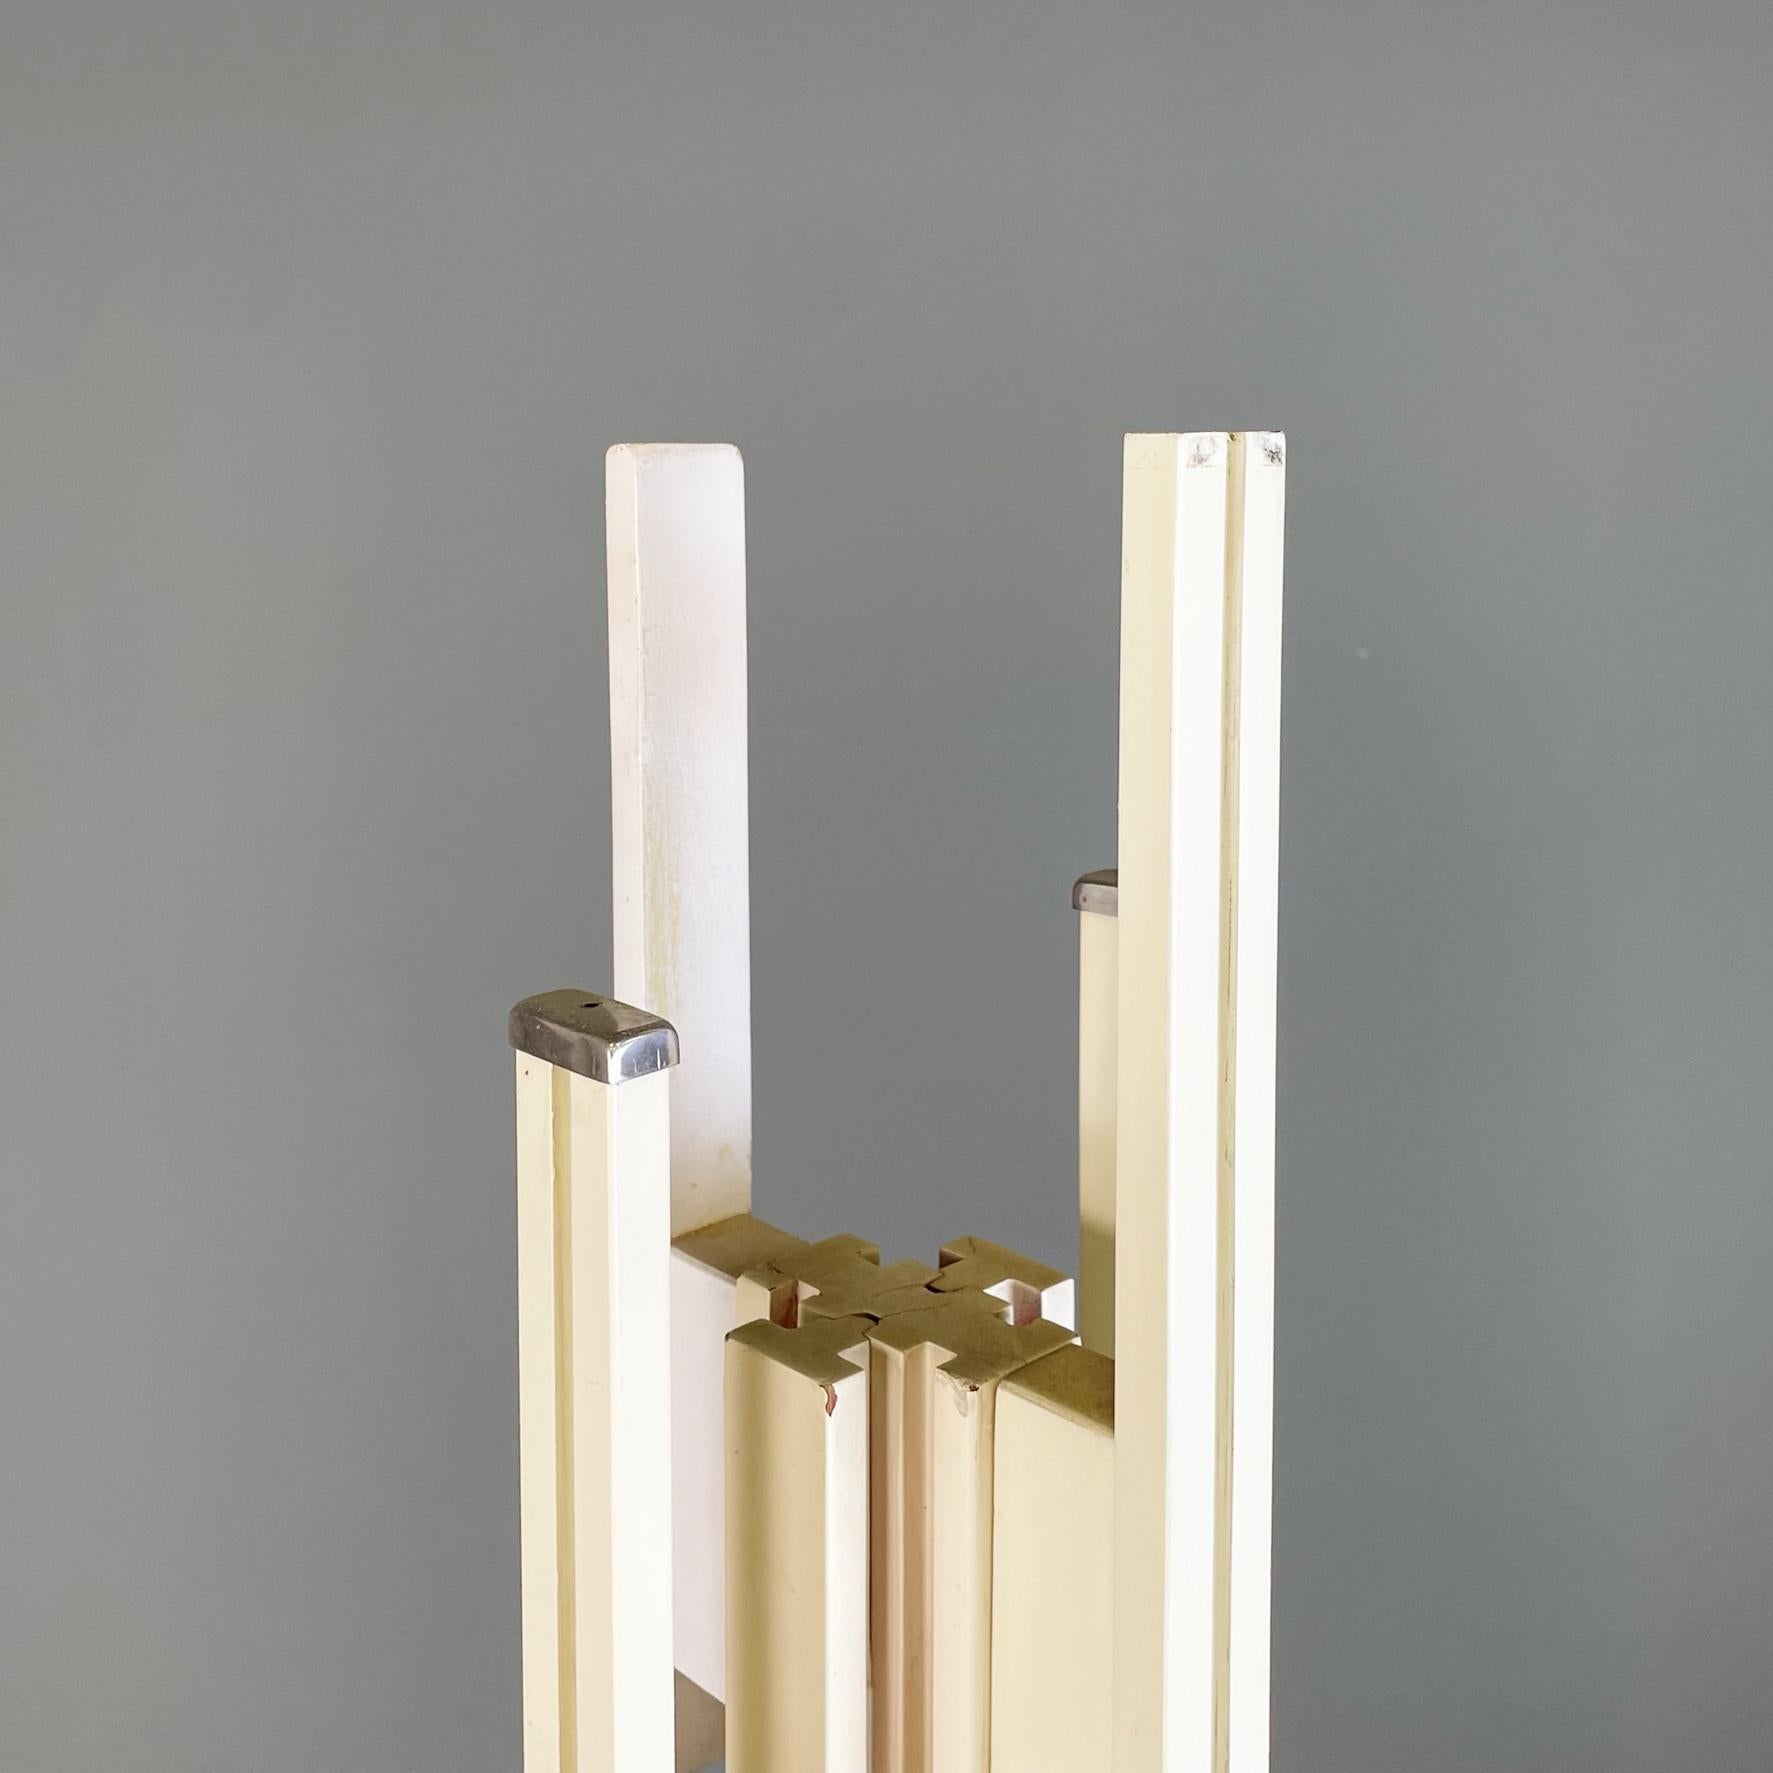 Italian Midcentury White Wood Metal Coat Stand by Carlo de Carli for Fiarm, 1960 In Good Condition For Sale In MIlano, IT